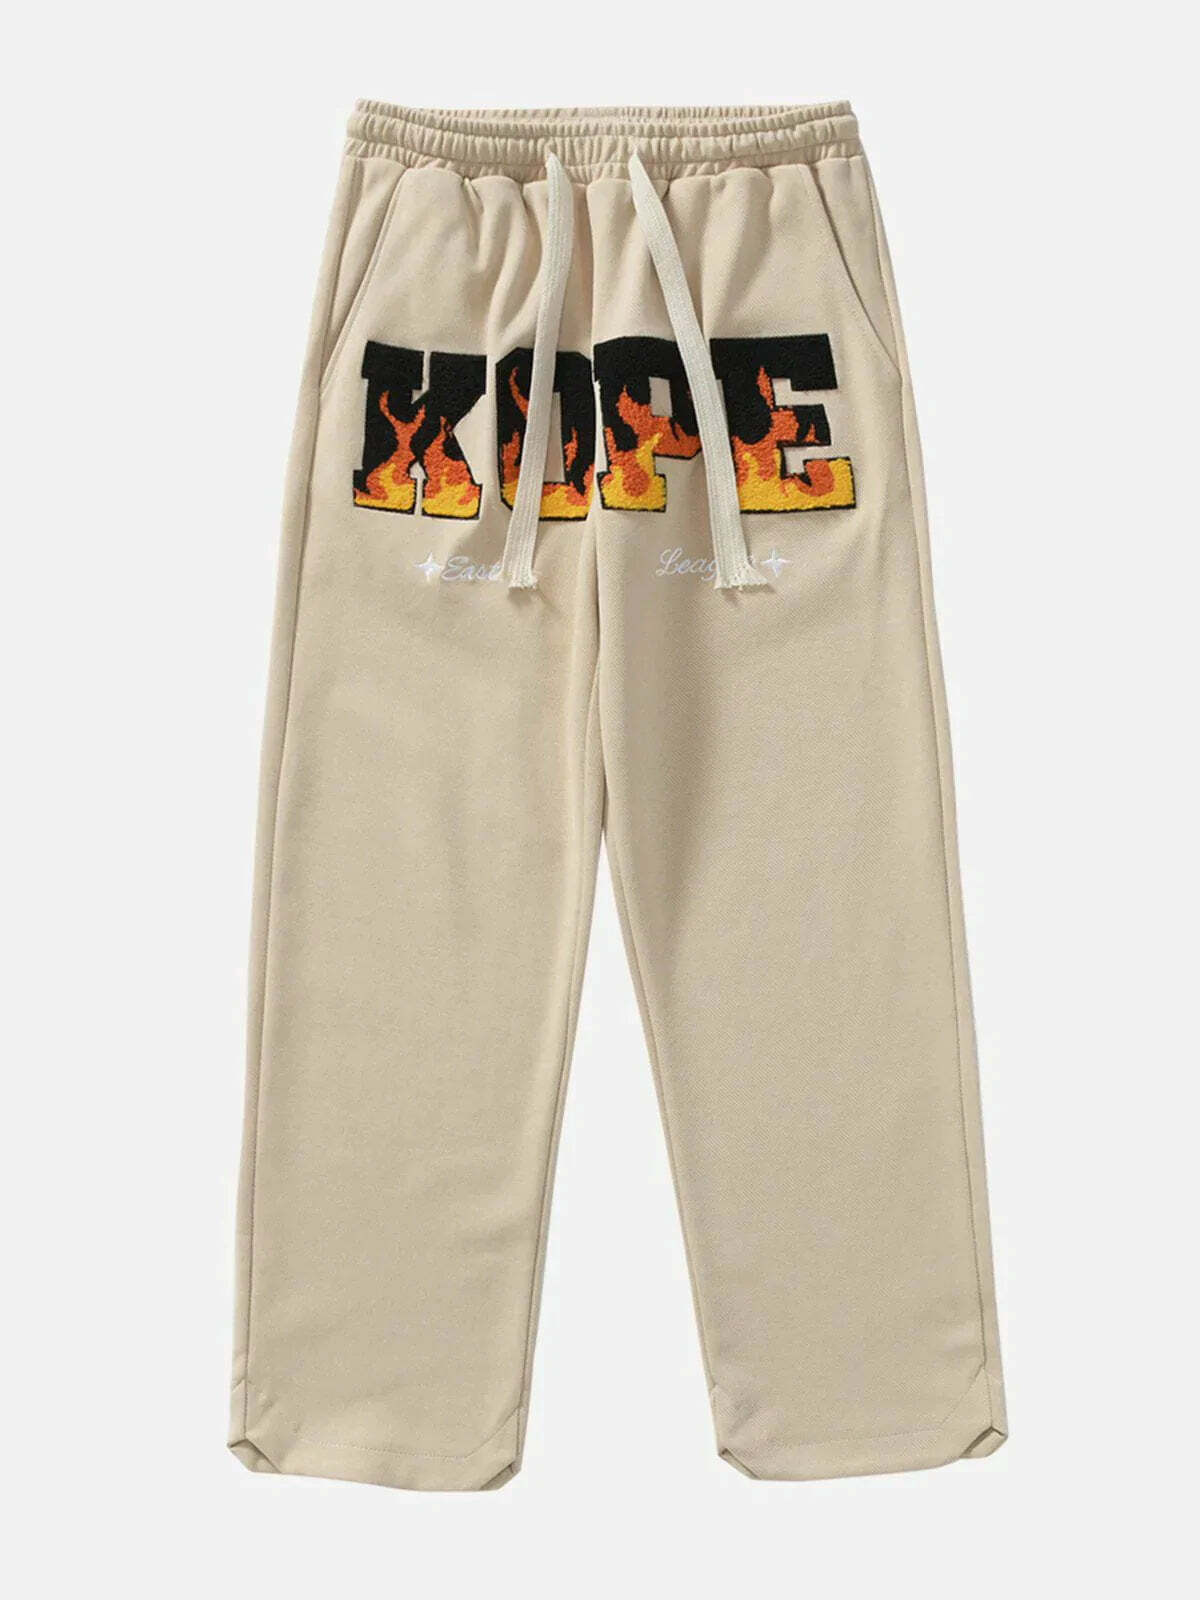 flaming letters sweatpants edgy & vibrant streetwear 3987